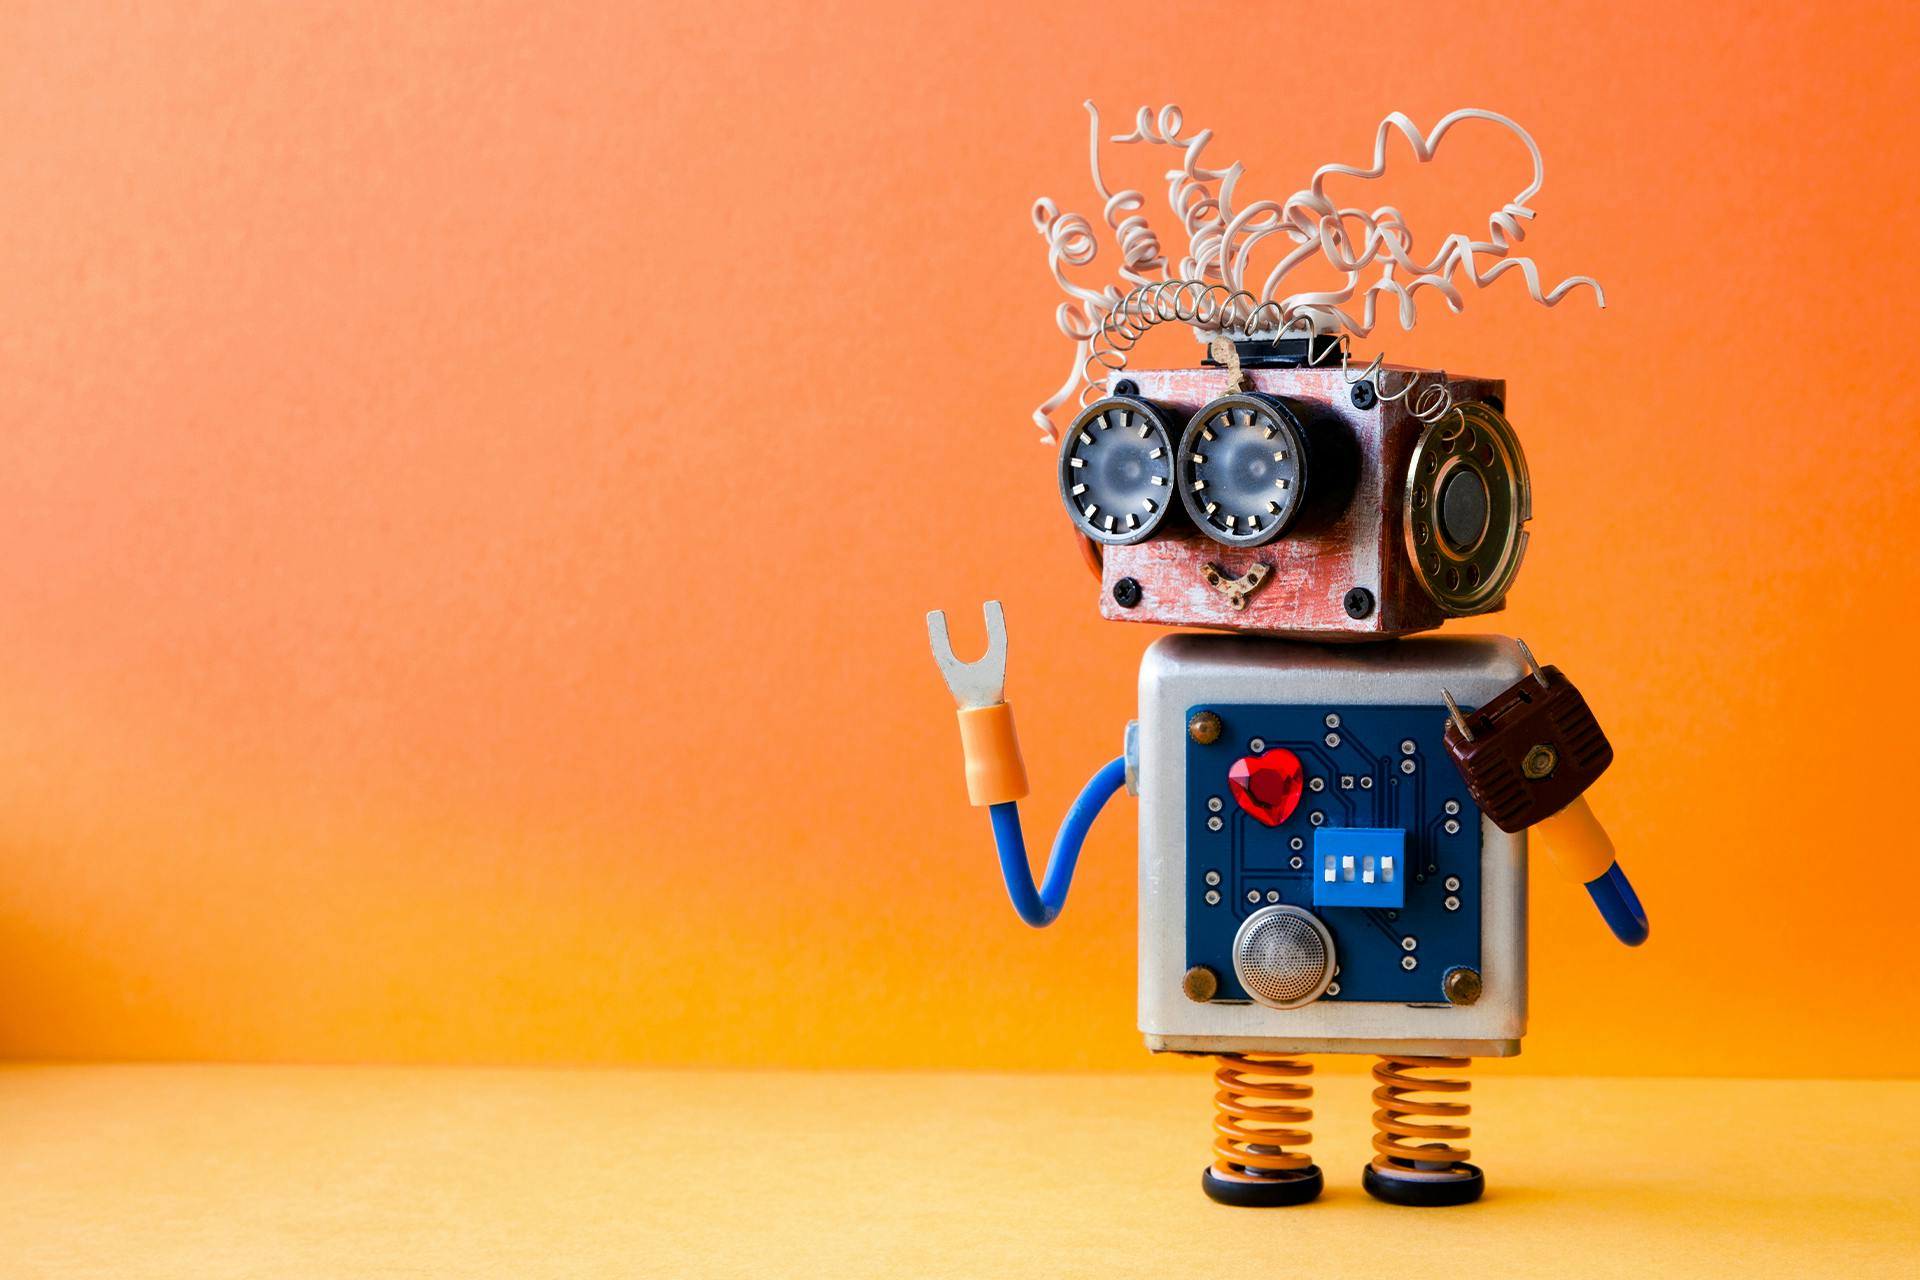 A toy robot that has been made using scraps of pieces from different machines or mechanical parts, like springs, electrical plugs, and wires. He could be social-savvy bot answering questions around how to build similar social media bots.